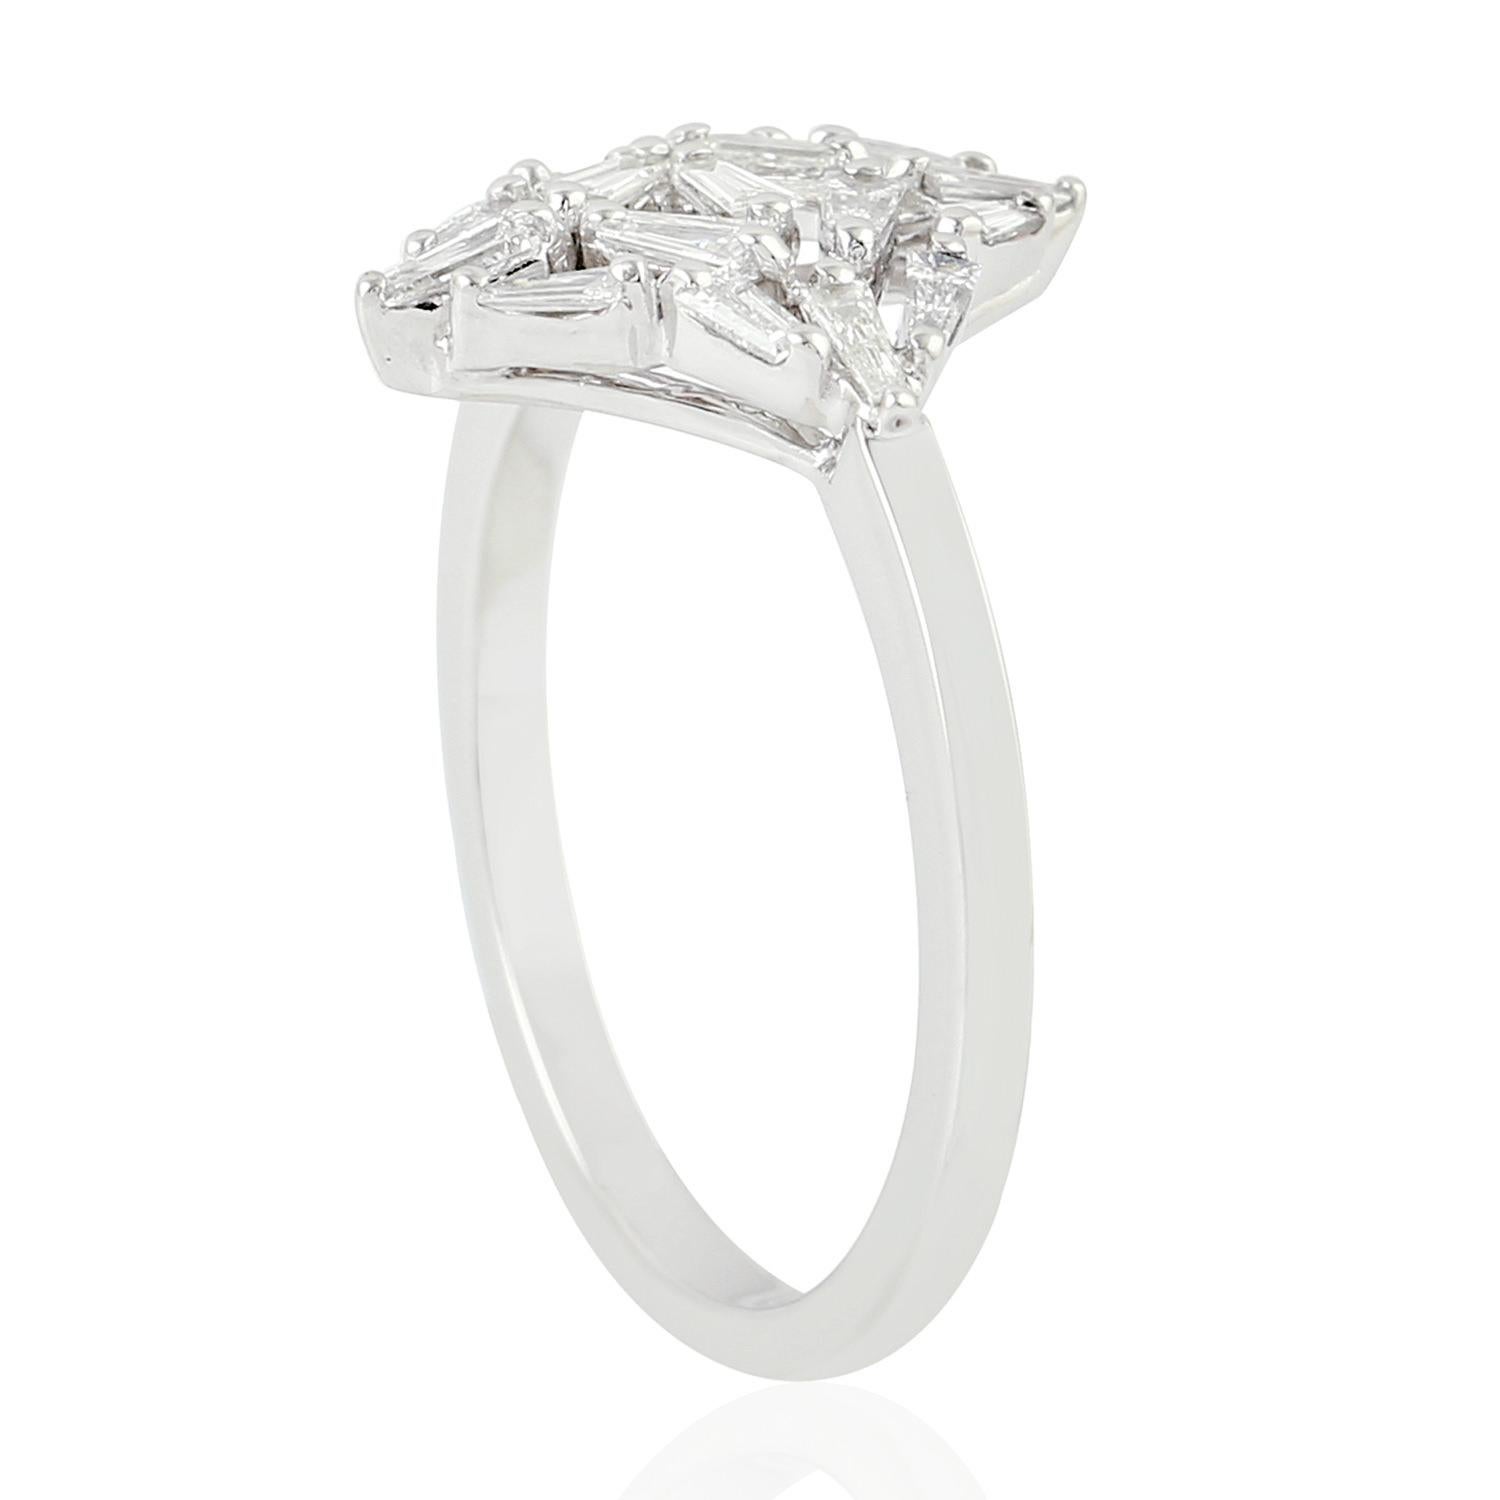 Mixed Cut Star Shaped Baguette Diamond Ring Made In 18k White Gold For Sale